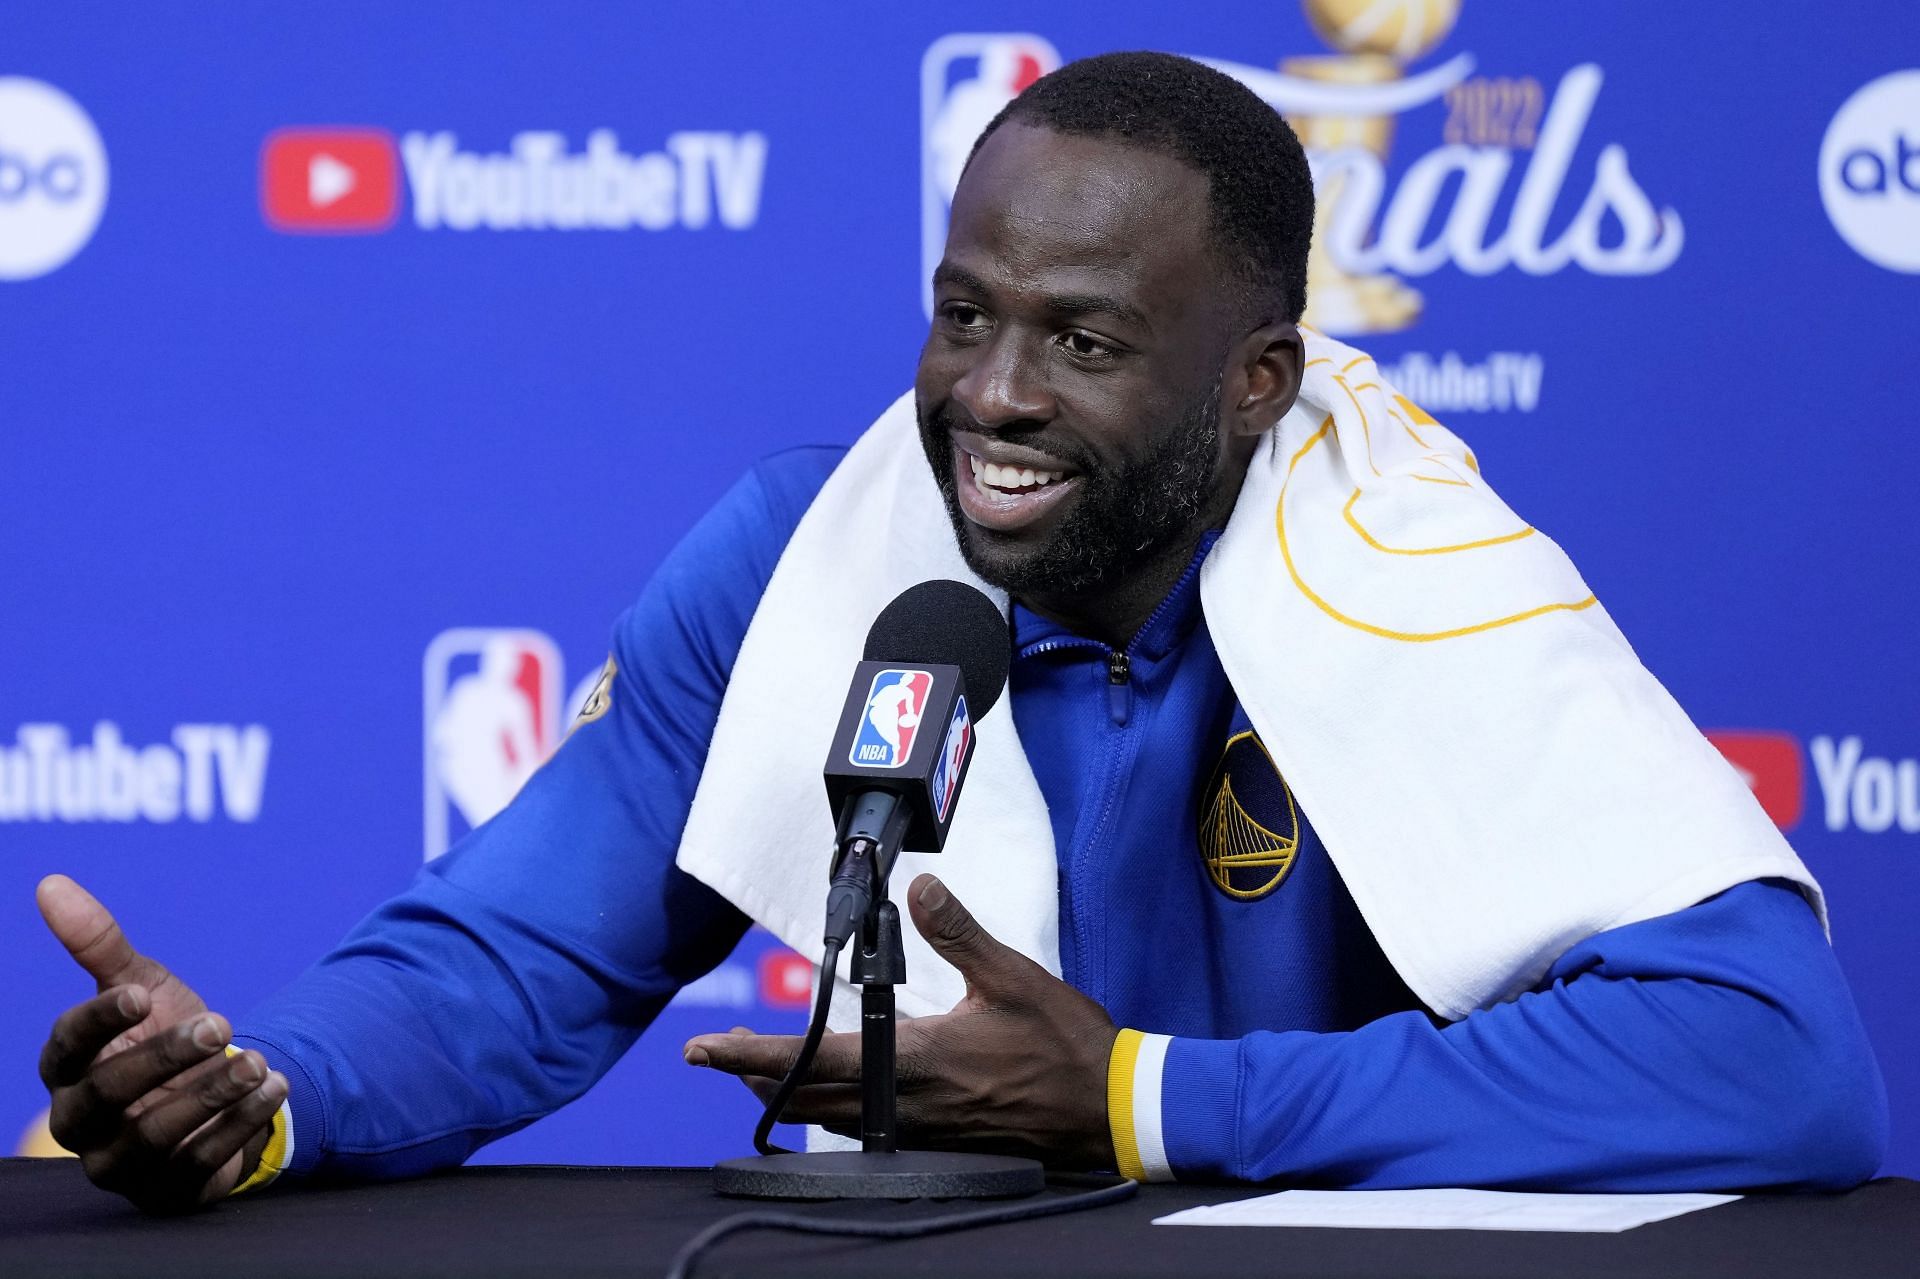 Along with his former teammate, Draymond Green hosts one of the most popular podcasts.